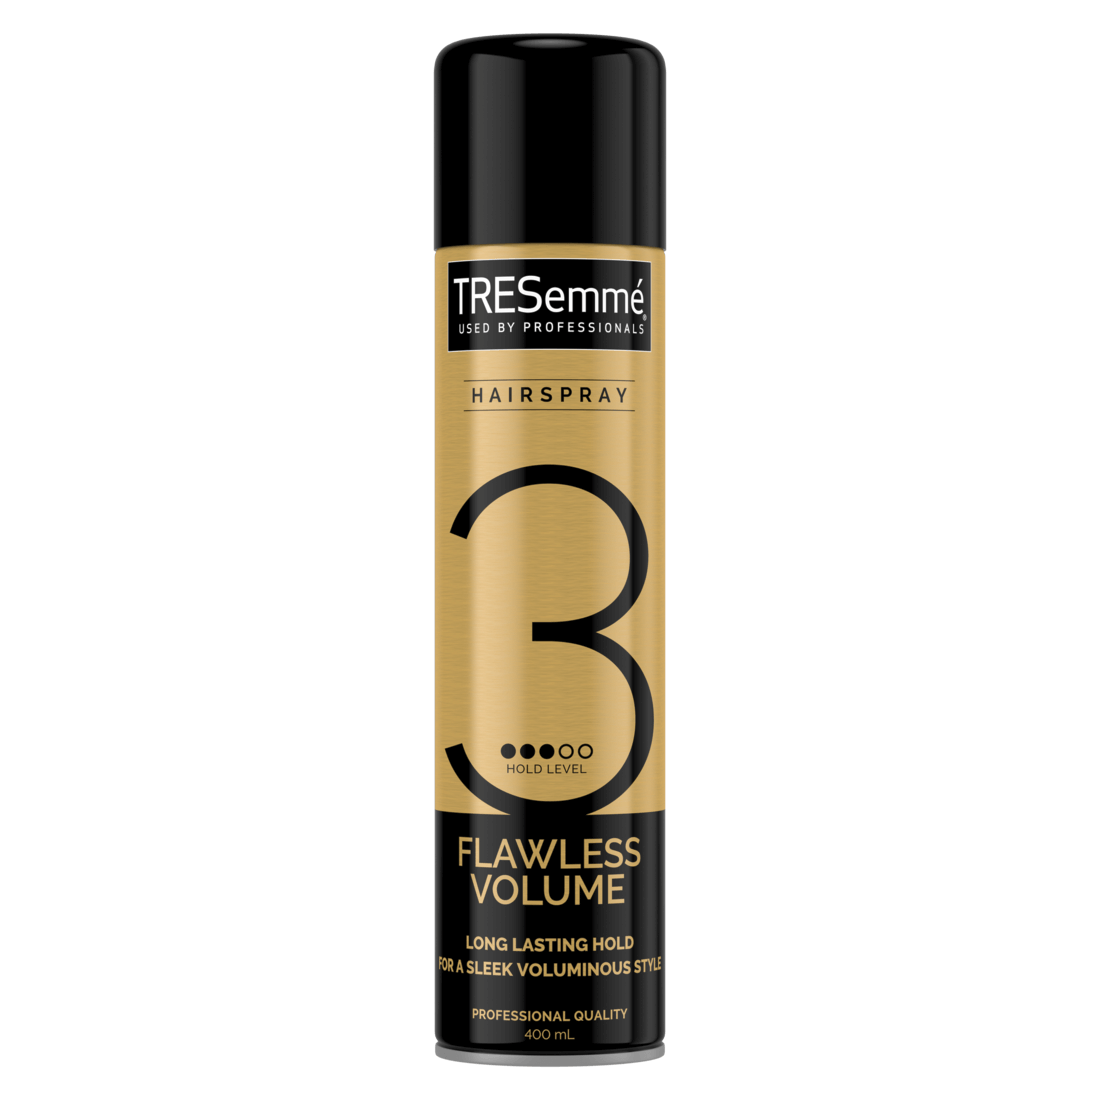 A 400ml can tresemme flawless volume hairspray